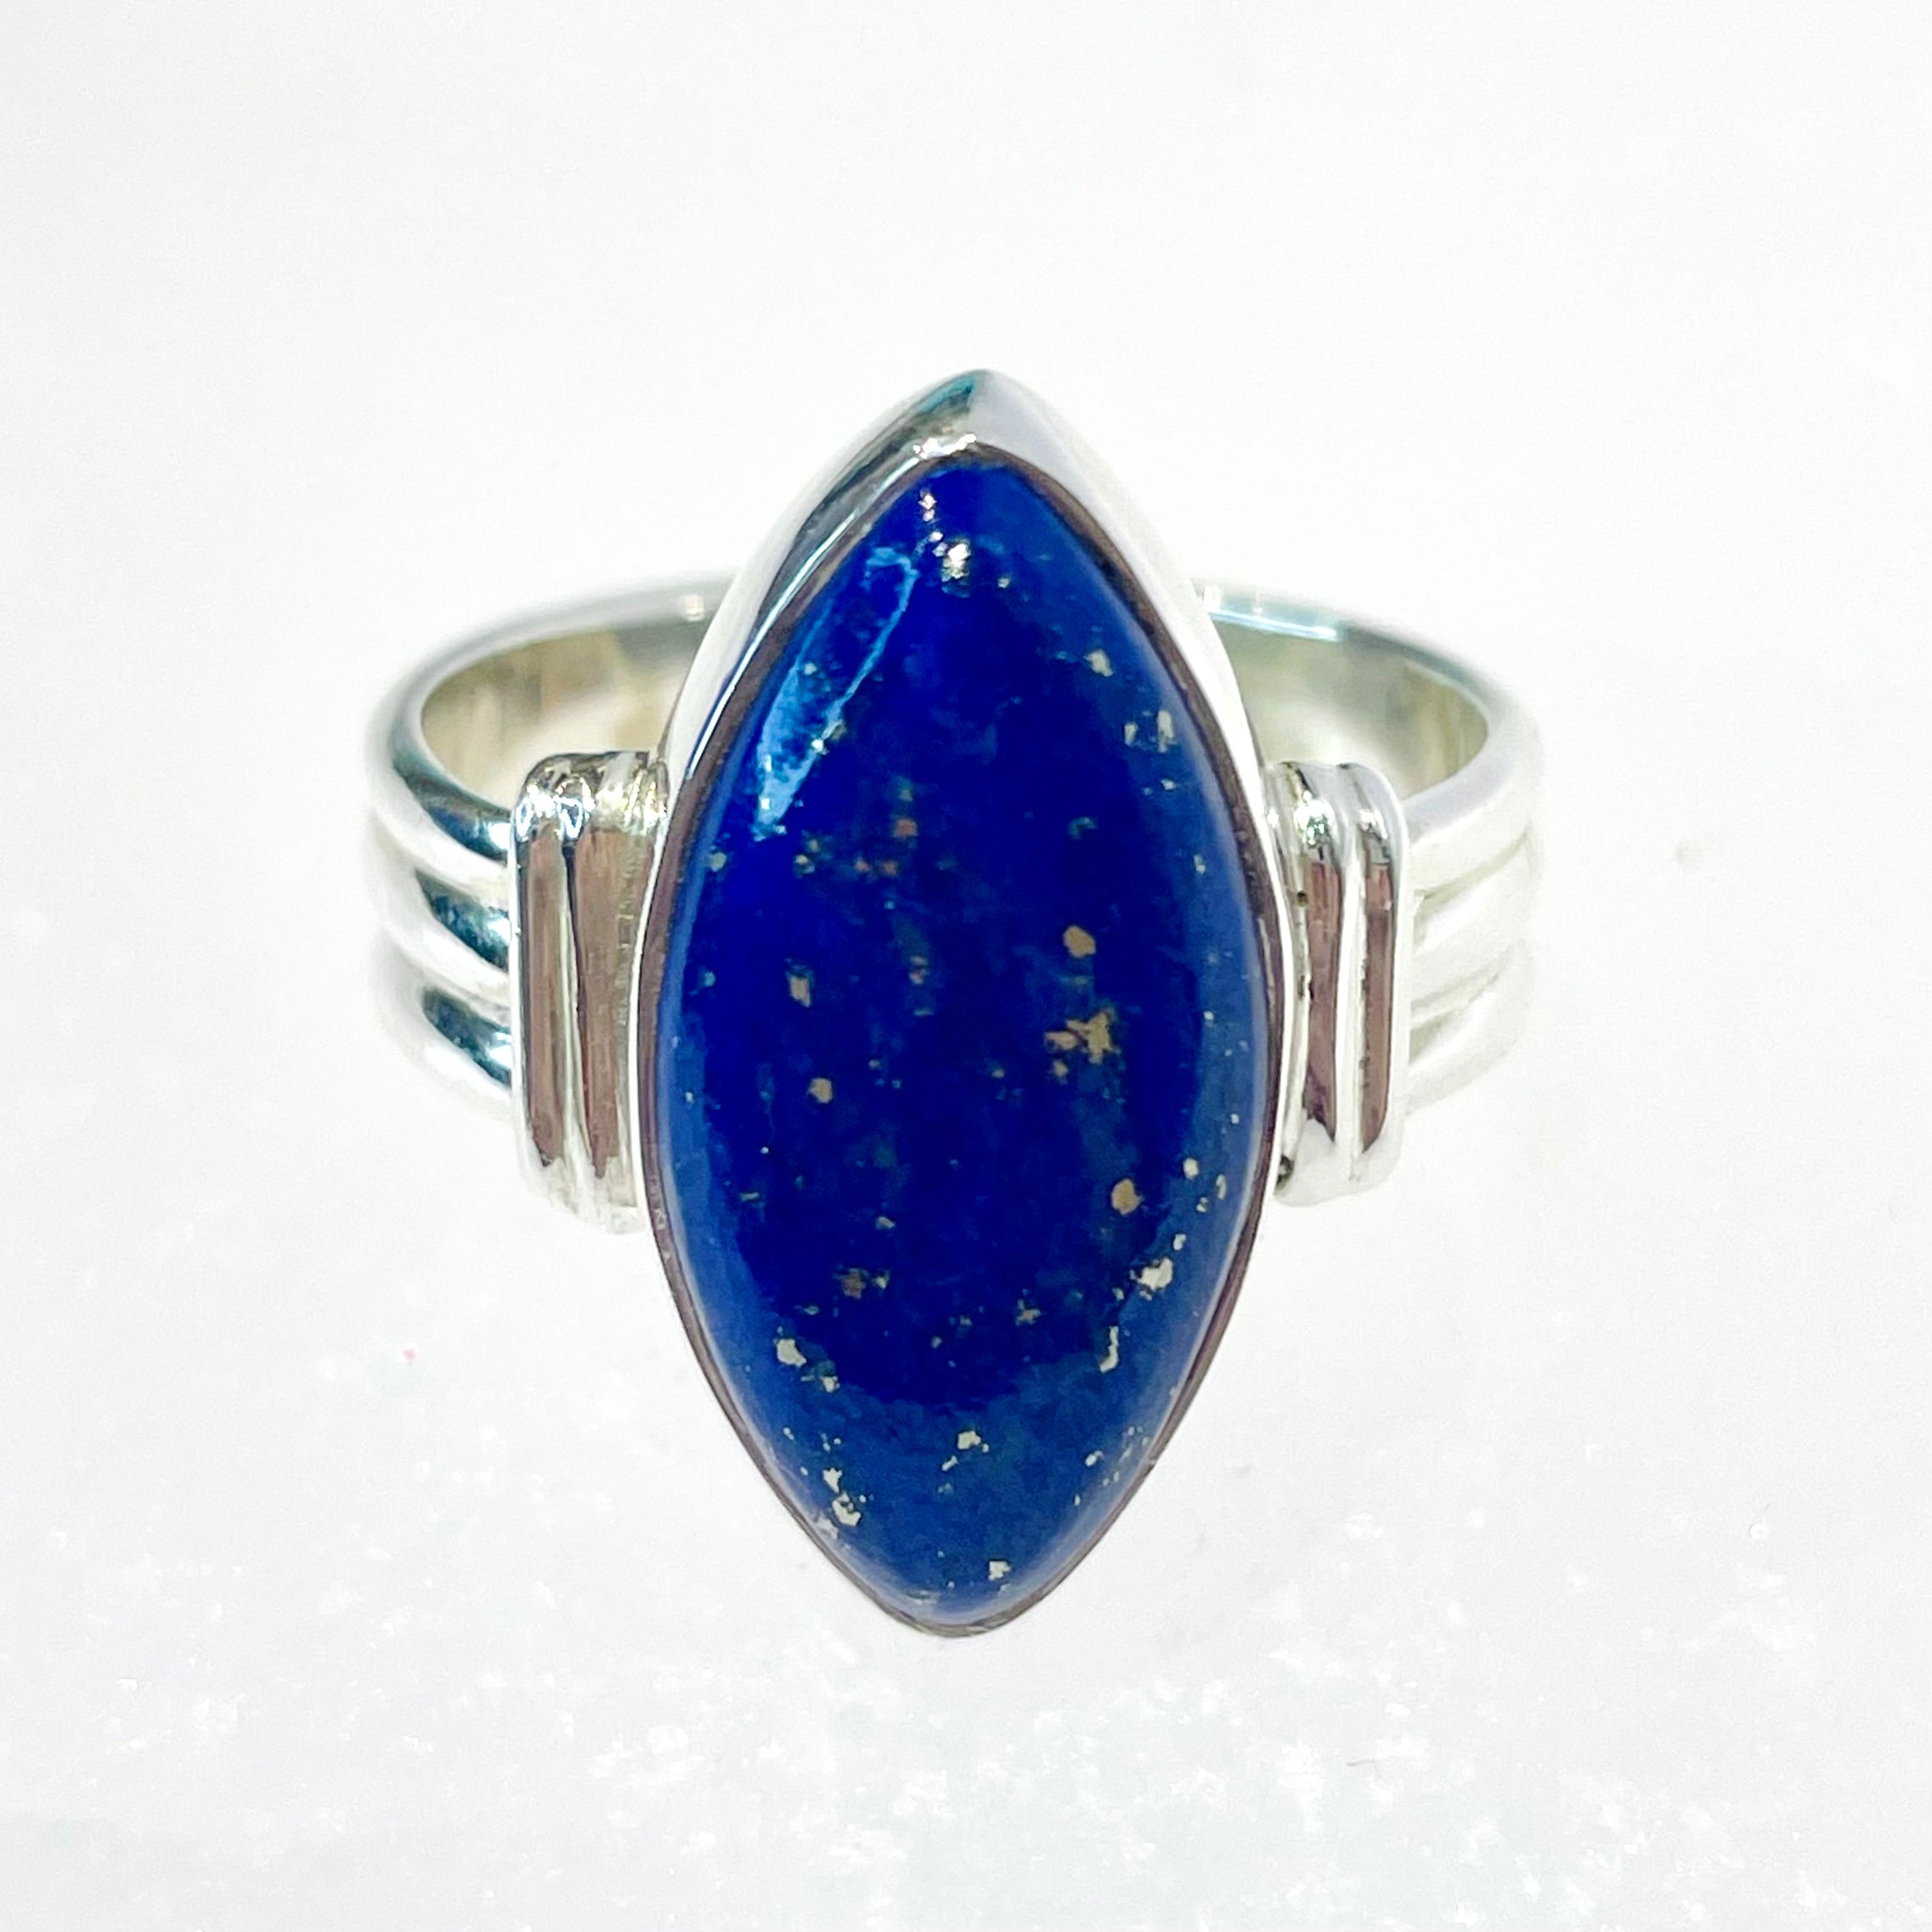 Lapis Lazuli ring in sterling silver